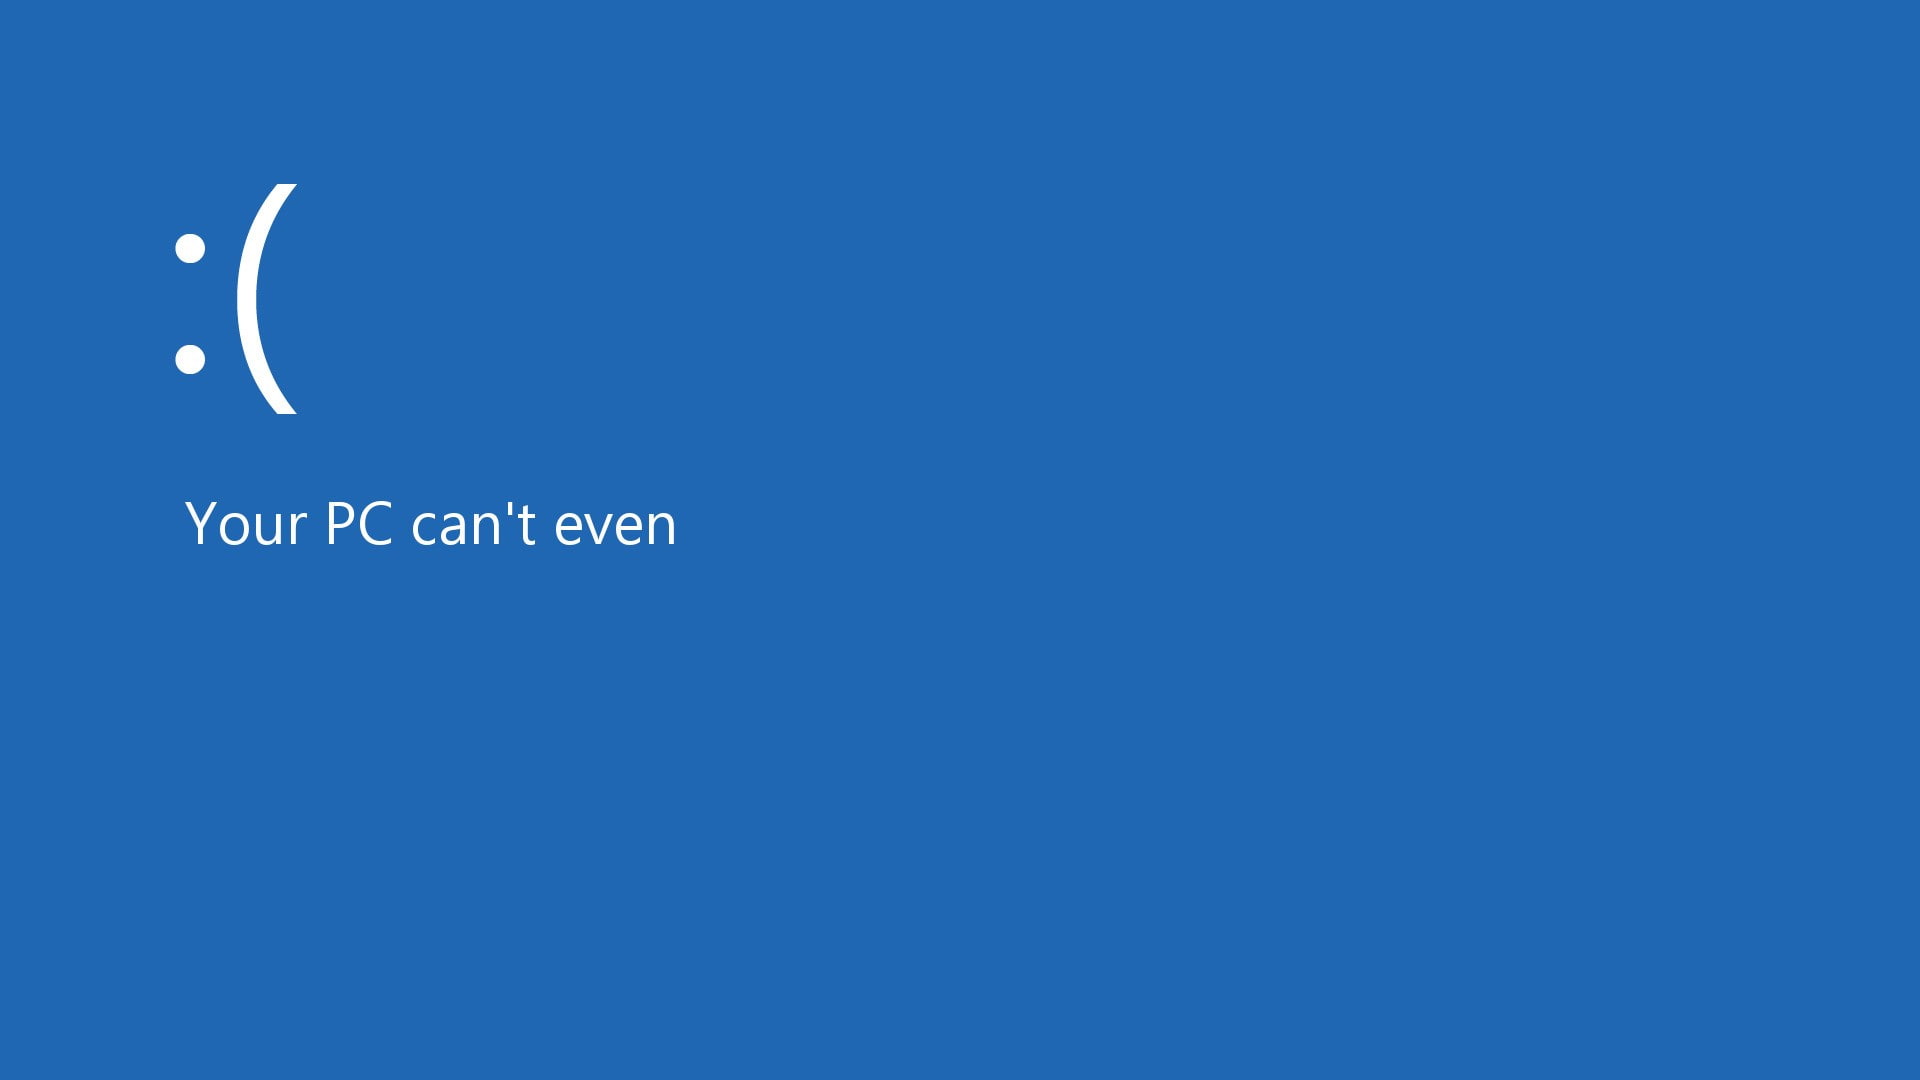 bsod windows 8 operating systems frown humor emoticons, blue